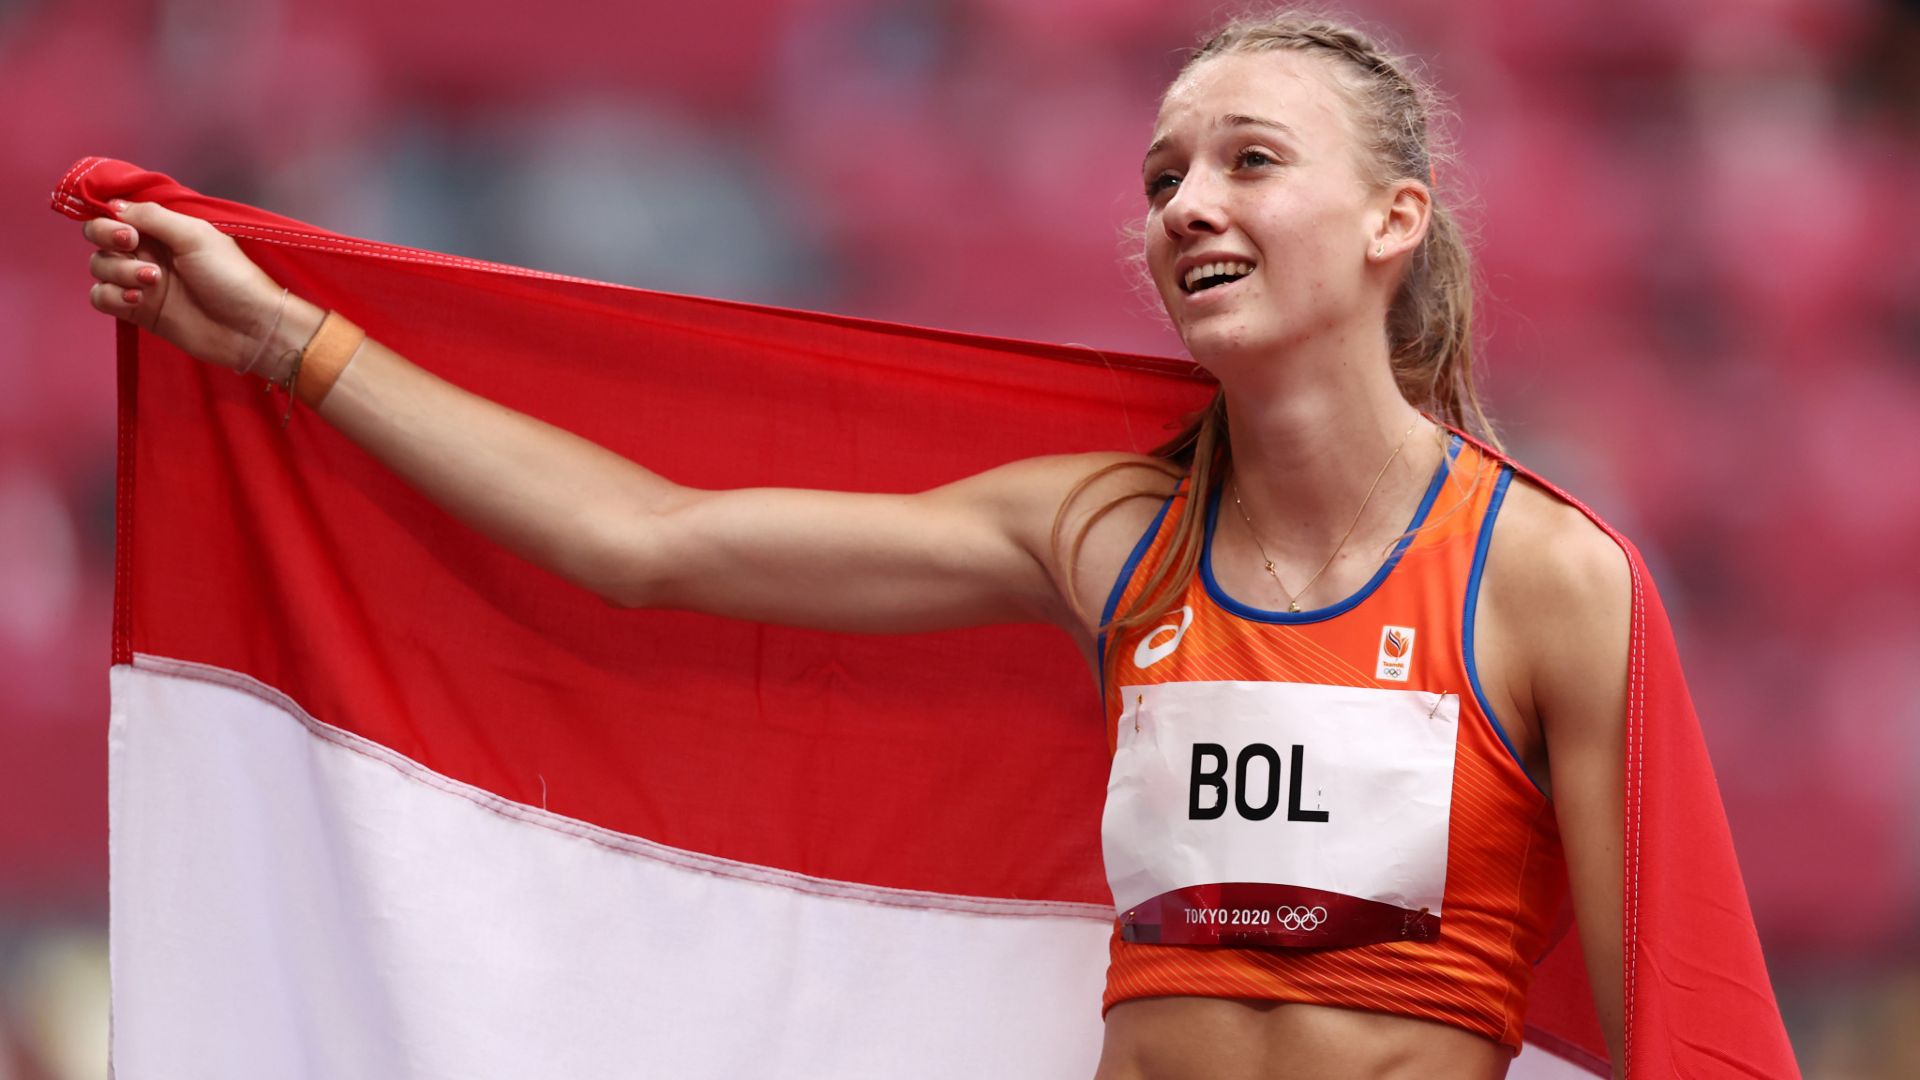 Femke Bol getting emotional after winning the bronze medal for the Netherlands at Tokyo Olympics 2020